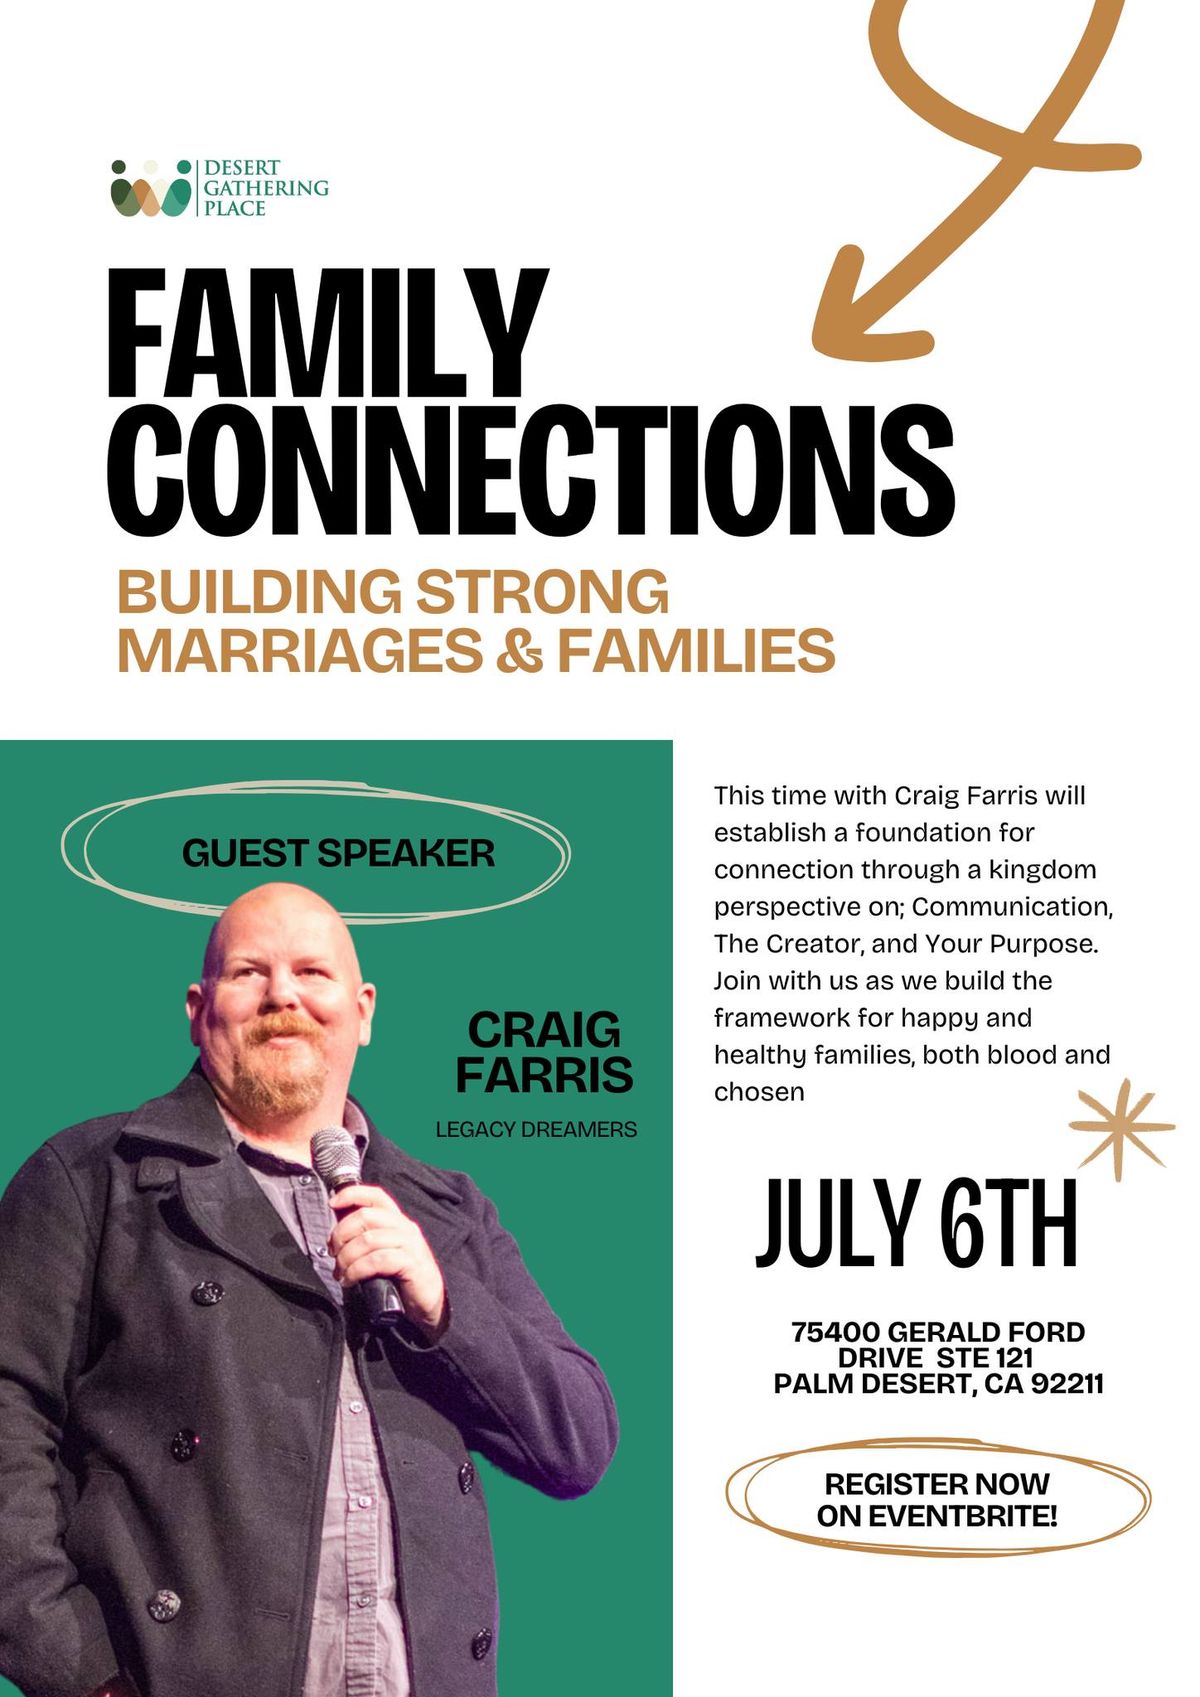 Family Connections - Building Strong Marriages & Families